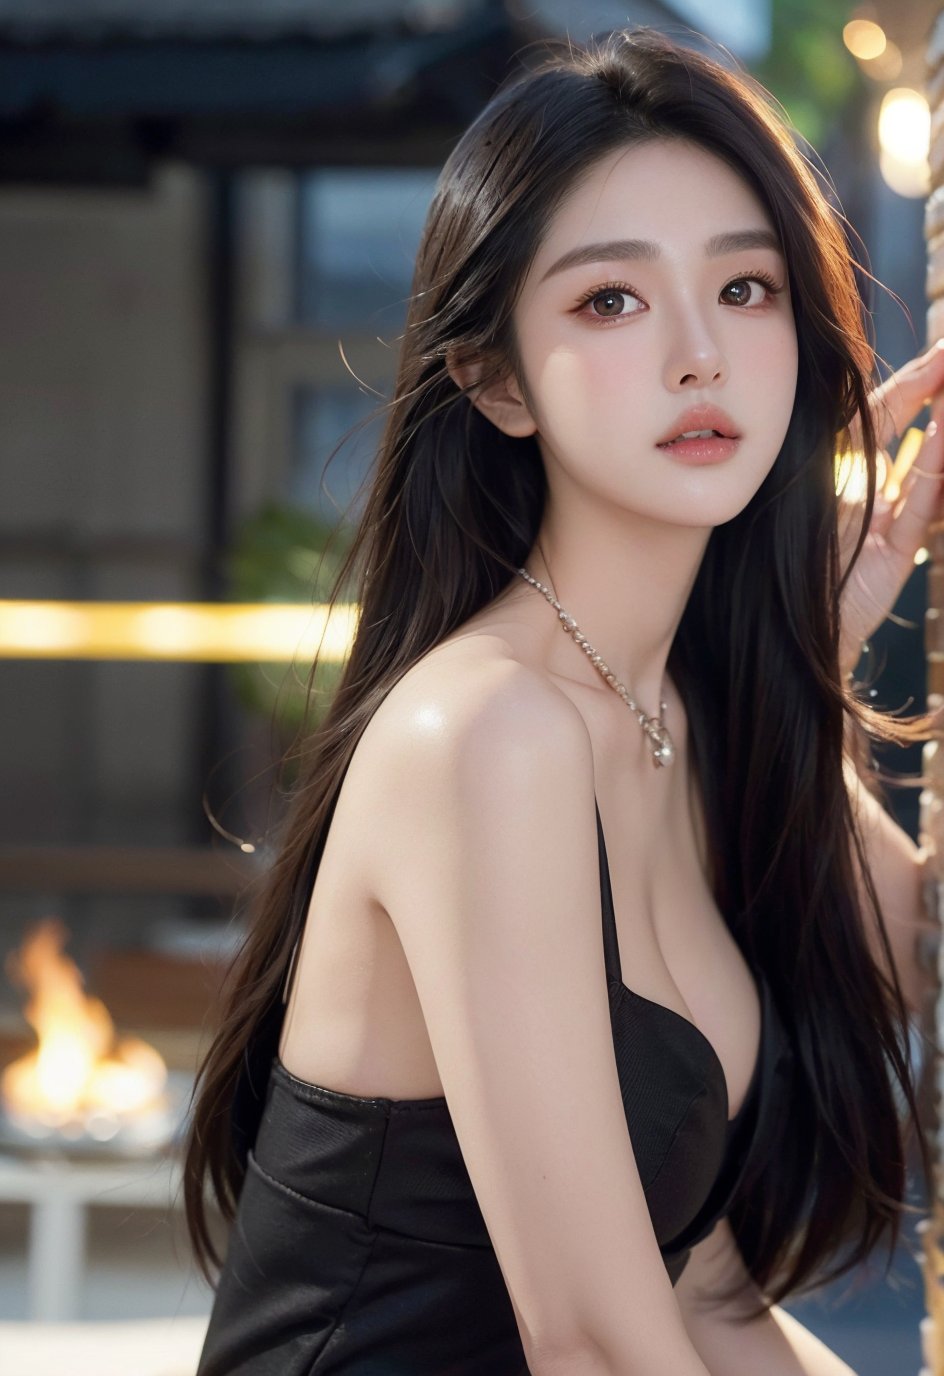 Woohee, 1 girl, detailed face, a woman with long black hair and a liquid_metal_blouse, outdoor scene, (night light),  led lighting, magnificent light, ((fire works)), close up, portrait, upperbody, RAW, (intricate details:1.3), (best quality:1.3), (masterpiece:1.3), (hyper realistic:1.3), best quality, 1 girl, ultra-detailed, ultra high resolution, very detailed mphysically based rendering, dynamic angle, dynamic pose, wind, 8K UHD, Vivid picture, High definition, intricate details, detailed texture, finely detailed, high detail, extremely detailed cg, High quality shadow, a realistic representation of the face, beautiful detailed, (high detailed skin, skin details), slim waist, beautiful and realistic and detailed hands and fingers:1, best ratio four finger and one thumb, (detailed face, detailed eyes, beautiful face), ((korean beauty, kpop idol, ulzzang, korean celebrity, korean cute, korean actress, korean, a beautiful 18 years old beautiful korean girl)), (high detailed skin, skin details), Detailed beautiful delicate face, Detailed beautiful delicate eyes, a face of perfect proportion, (beautiful and realistic and detailed hands and fingers:1.3), (Big breasts:1.3), (full body shot:1.3), (long legs:1.3), (sparkling eyes:1.3), (sparkling lips:1.3), taken by Canon EOS, SIGMA Art Lens 35mm F1.4, ISO 200 Shutter Speed 2000, Vivid ((korean beauty, kpop idol, ulzzang, korean celebrity, korean cute, korean actress, korean, 인스타 여신:1.3, a beautiful 18 years old beautiful korean girl)), (blue eye), (black long hair),chanel_jewelry, chanel_bag, vancleef_necklace,Nice legs and hot body, see-through,hourglass bodyshape,WOOHEE